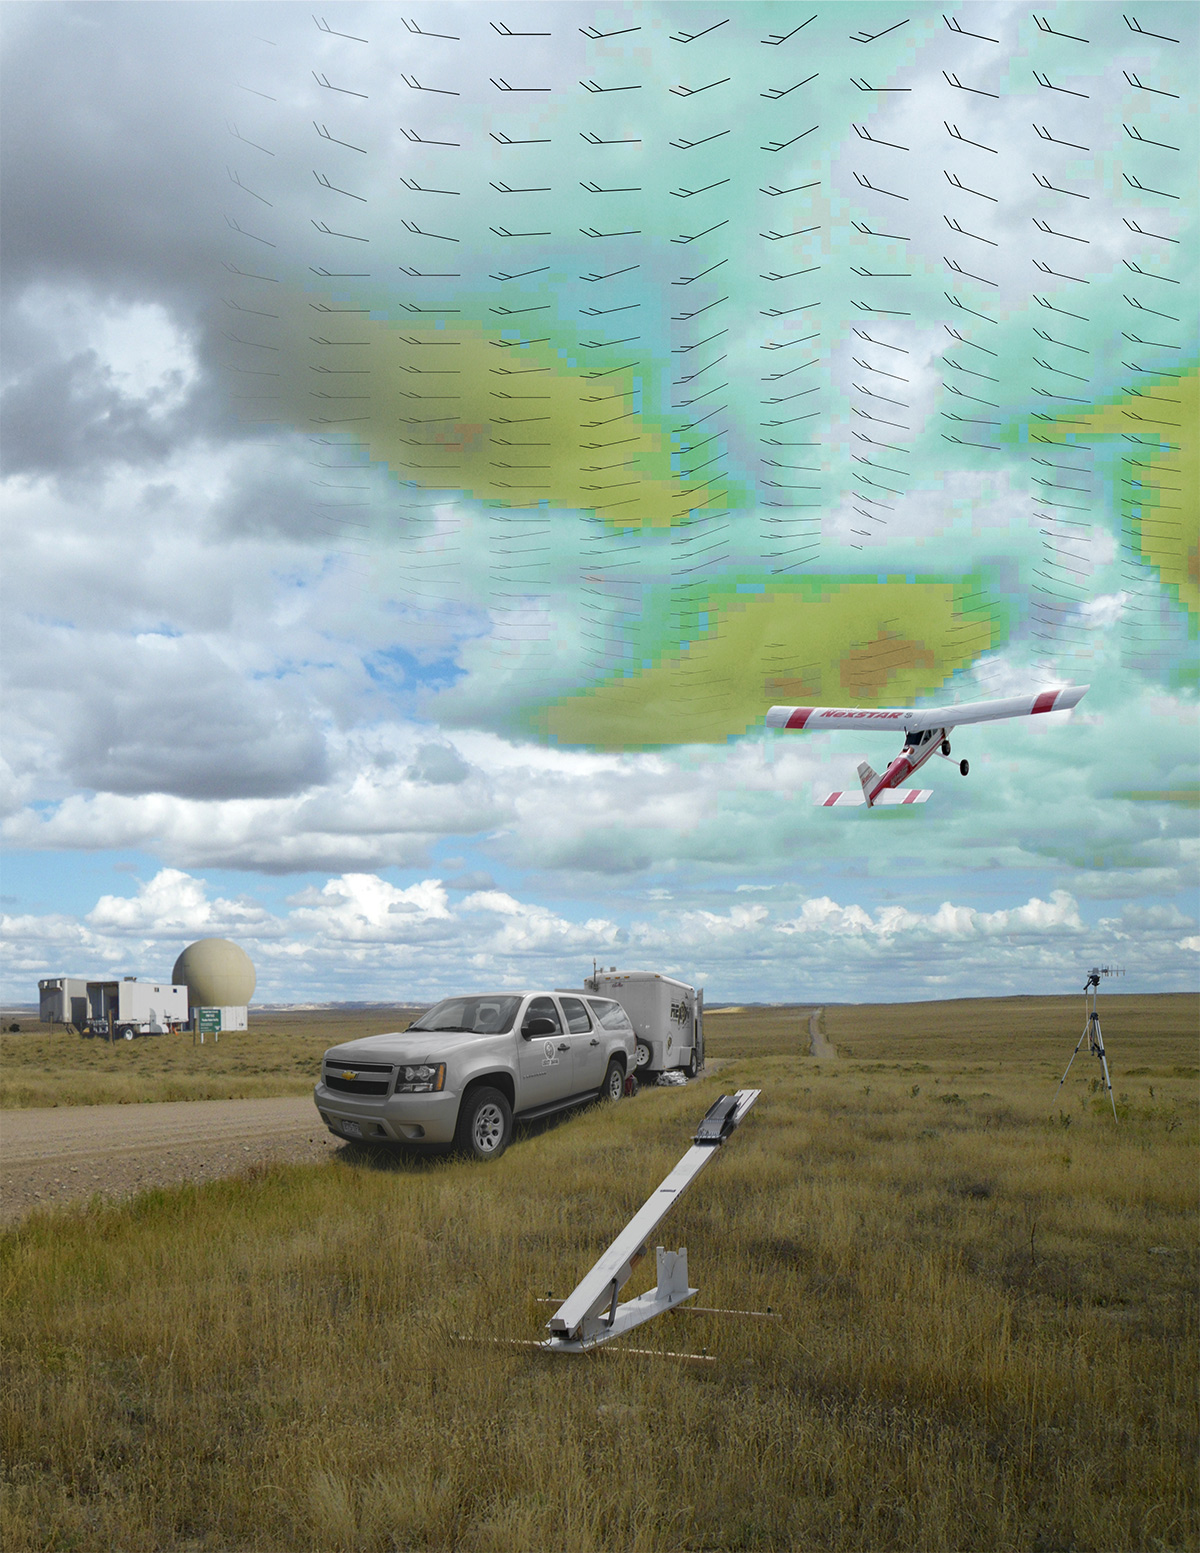 FIGURE 1. This image was created to demonstrate the meteorological utility of UAS ©2012 Jack Elston University of Colorado. Courtesy of Black Swift Technologies.